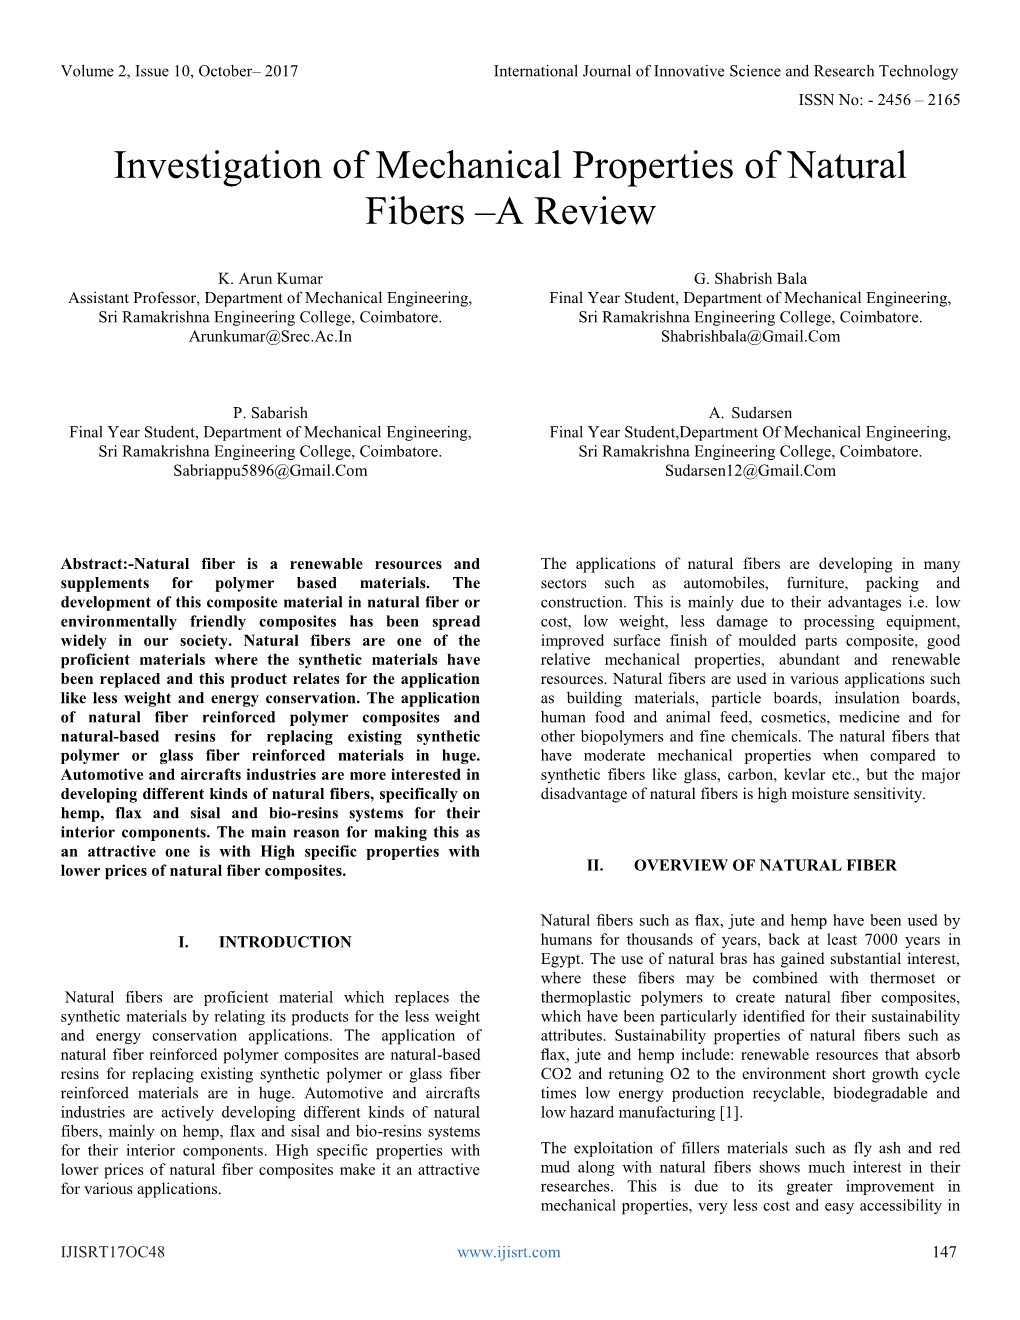 Investigation of Mechanical Properties of Natural Fibers –A Review